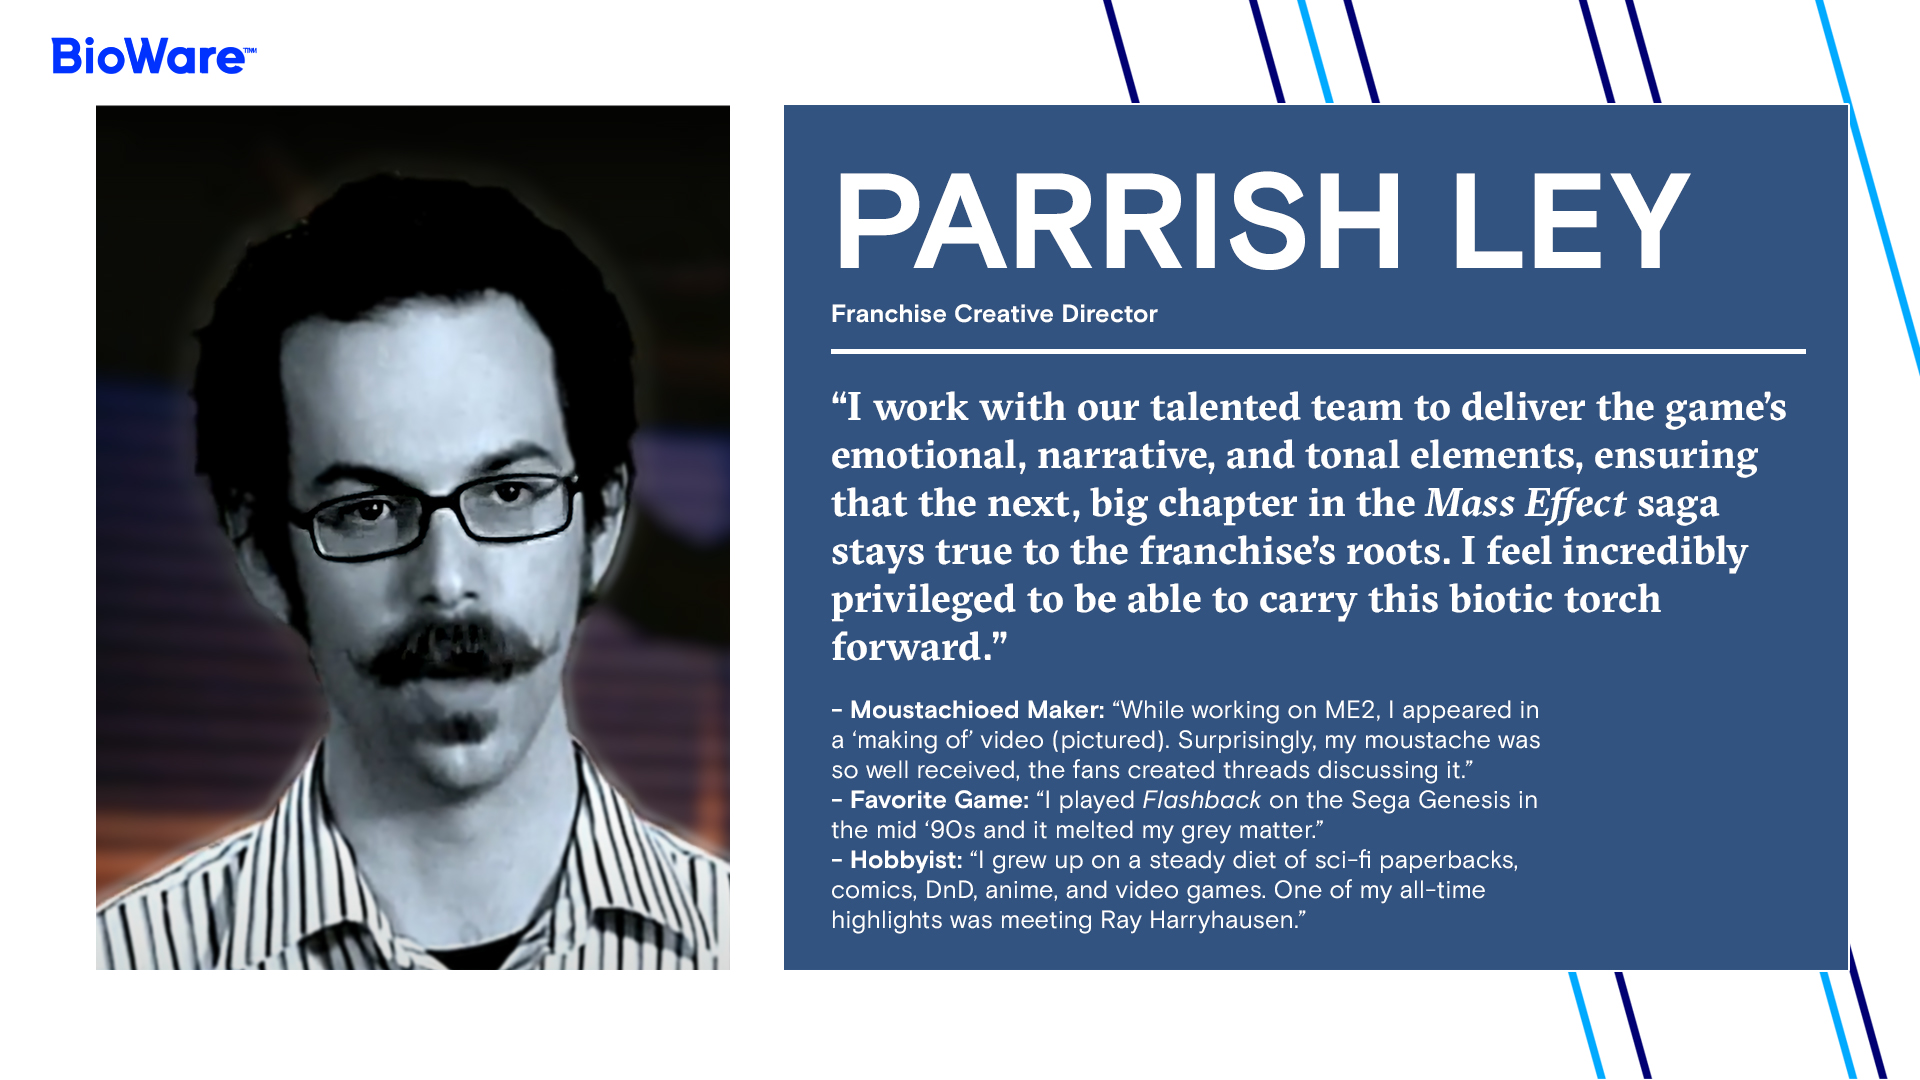 PARRISH LEY Franchise Creative Director  “I work with our talented team to deliver the game’s emotional, narrative, and tonal elements, ensuring that the next, big chapter in the Mass Effect saga stays true to the franchise’s roots. I feel incredibly privileged to be able to carry this biotic torch forward.”  - Moustachioed Maker: “While working on ME2, I appeared in a ‘making of’ video (pictured). Surprisingly, my moustache was so well received, the fans created threads discussing it.”    - Favorite Game: “I played Flashback on the Sega Genesis in the mid ‘90s and it melted my grey matter.” - Hobbyist: “I grew up on a steady diet of sci-fi paperbacks, comics, DnD, anime, and video games. One of my all-time highlights was meeting Ray Harryhausen.”